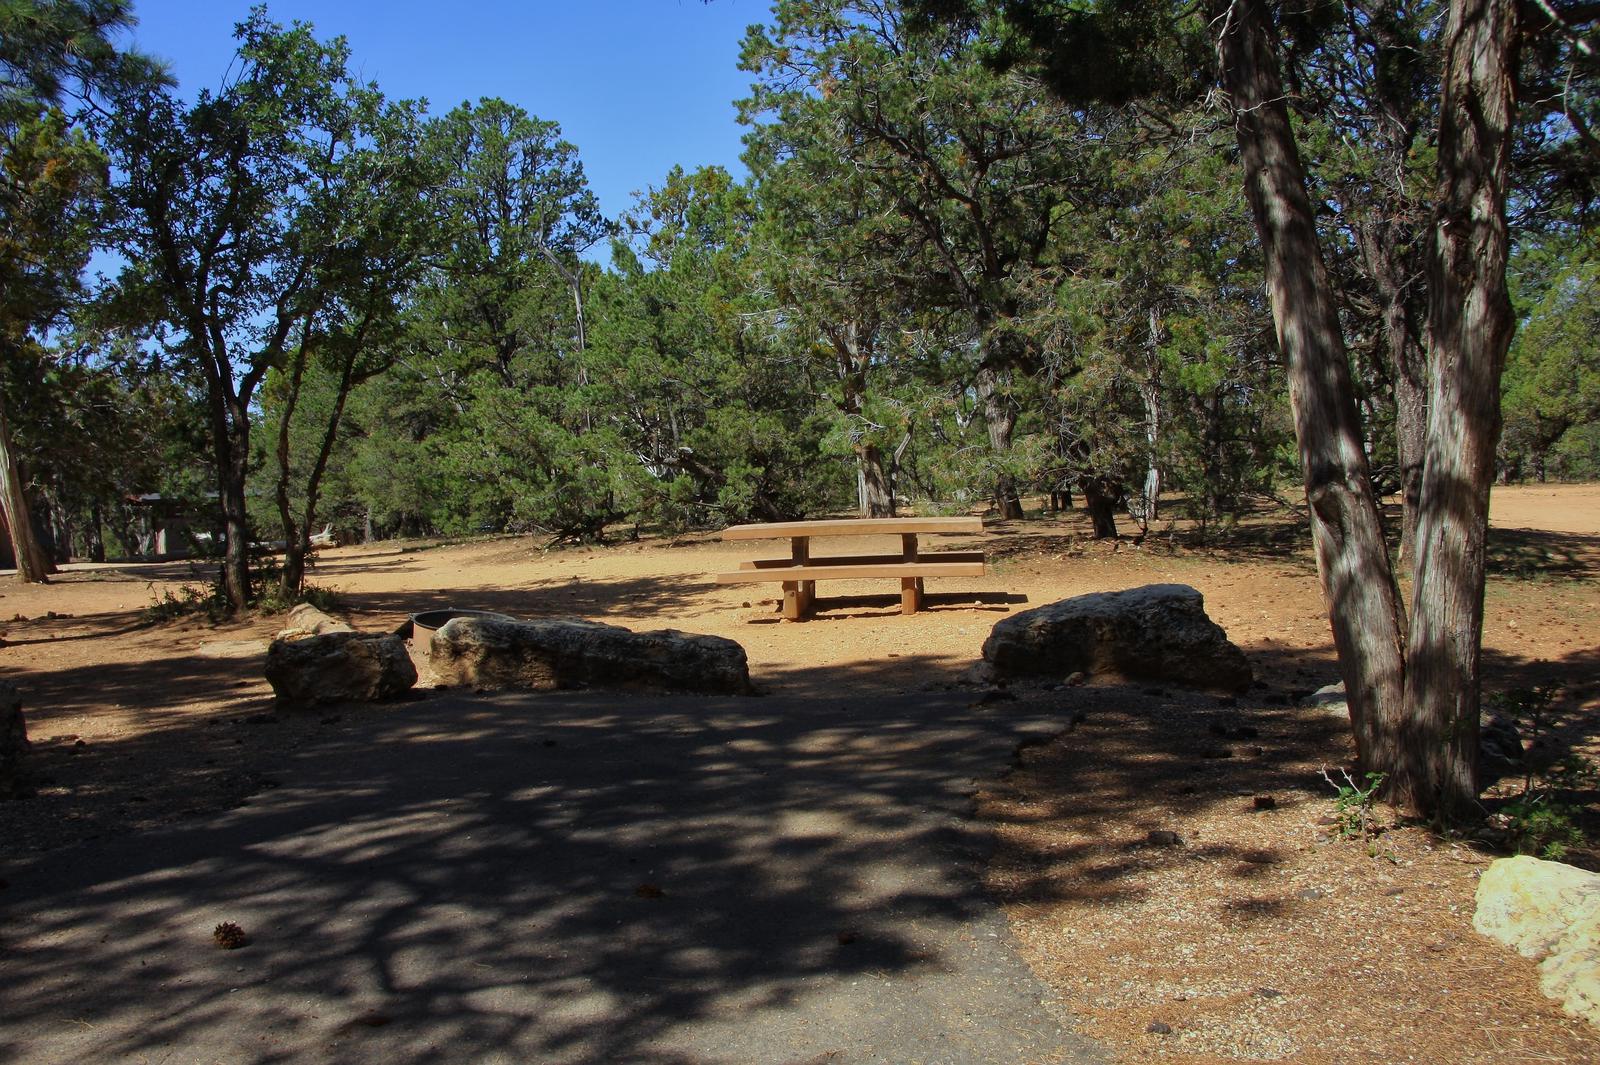 Picnic table, fire pit, and parking spot, Mather CampgroundPicnic table, fire pit, and parking spot for Oak Loop 264, Mather Campground